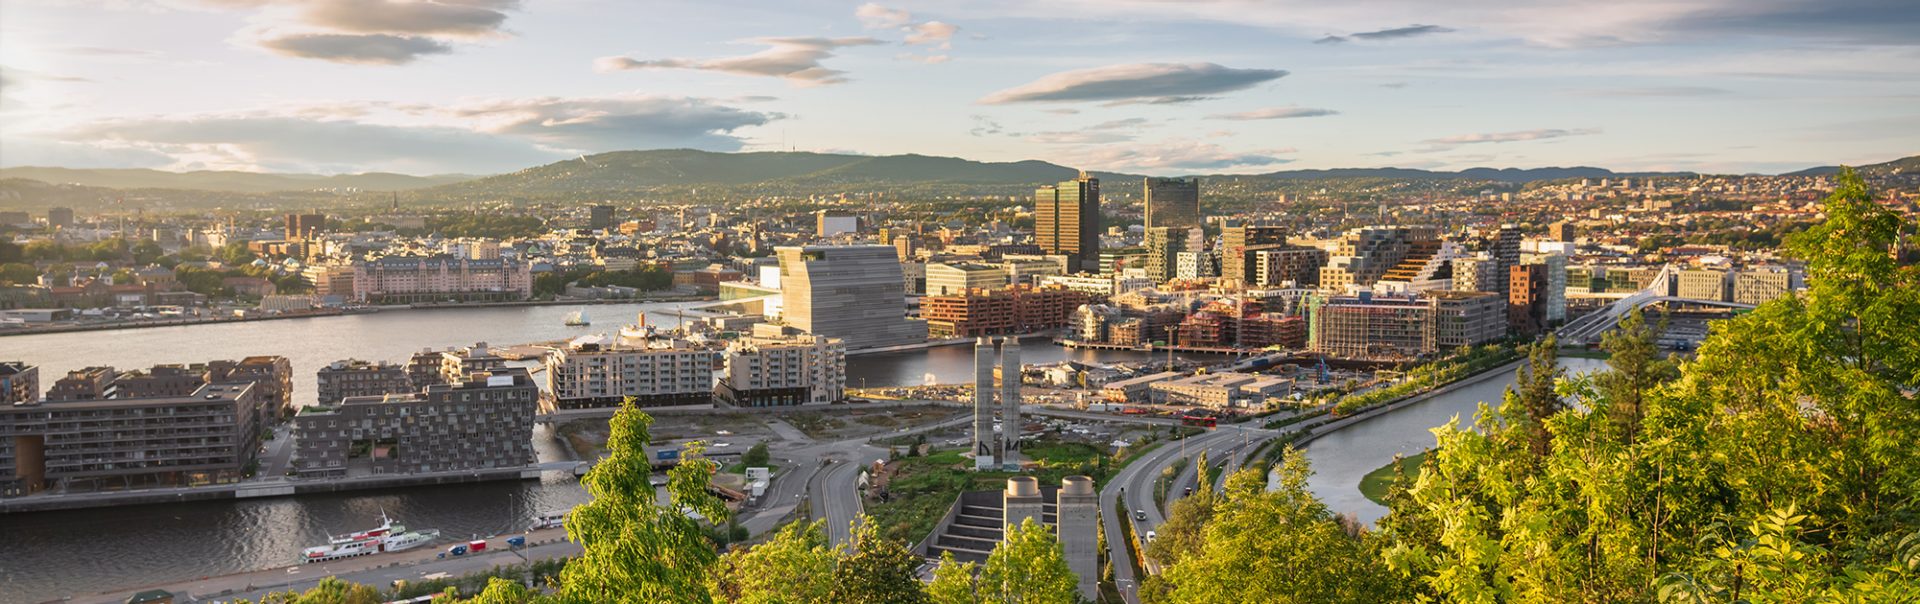 Sunset Panorama from above Ekebergparken over Sorenga District towards Oslo Cityscape with Oslo Harbor in late afternoon light close to sunset. Oslo City, Norway, Scandinavia, Northern Europe